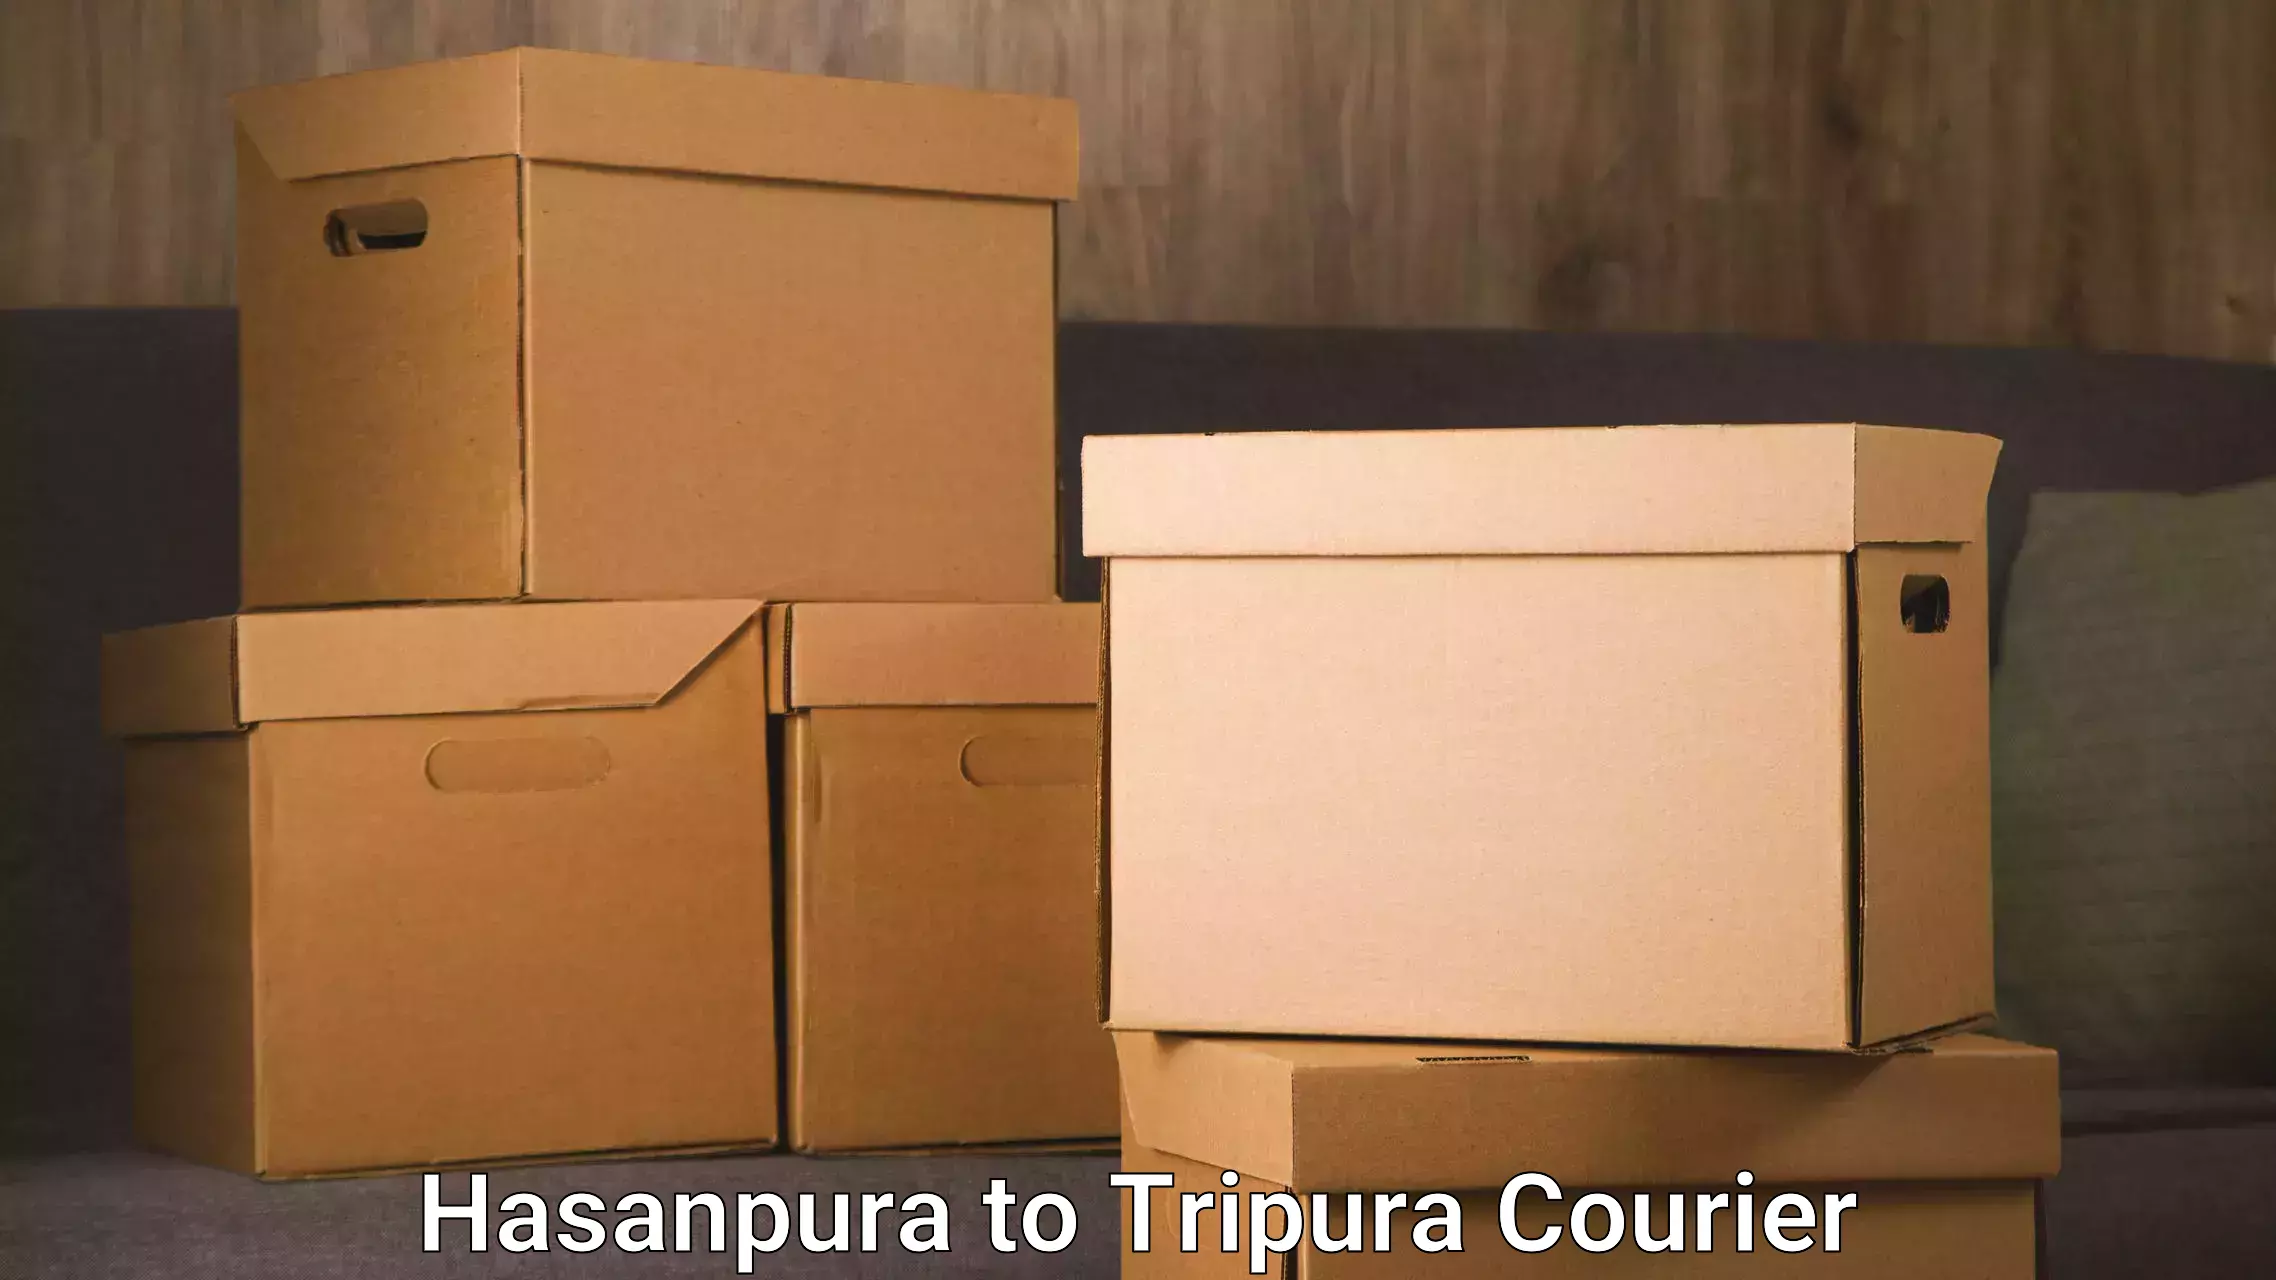 Quality moving and storage Hasanpura to Udaipur Tripura